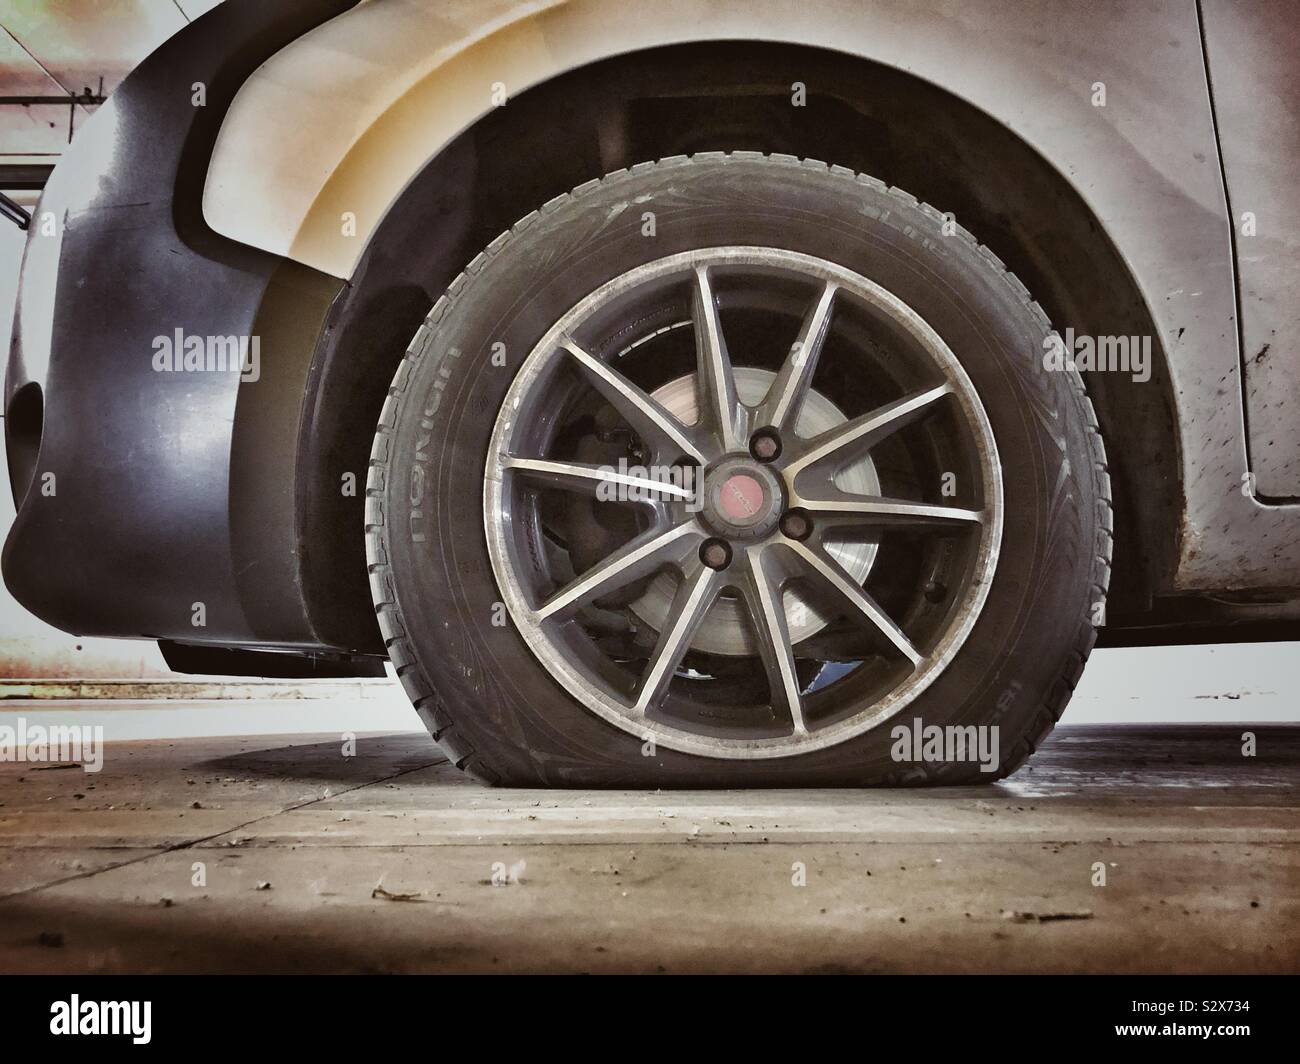 A car with a flat tyre tire Stock Photo